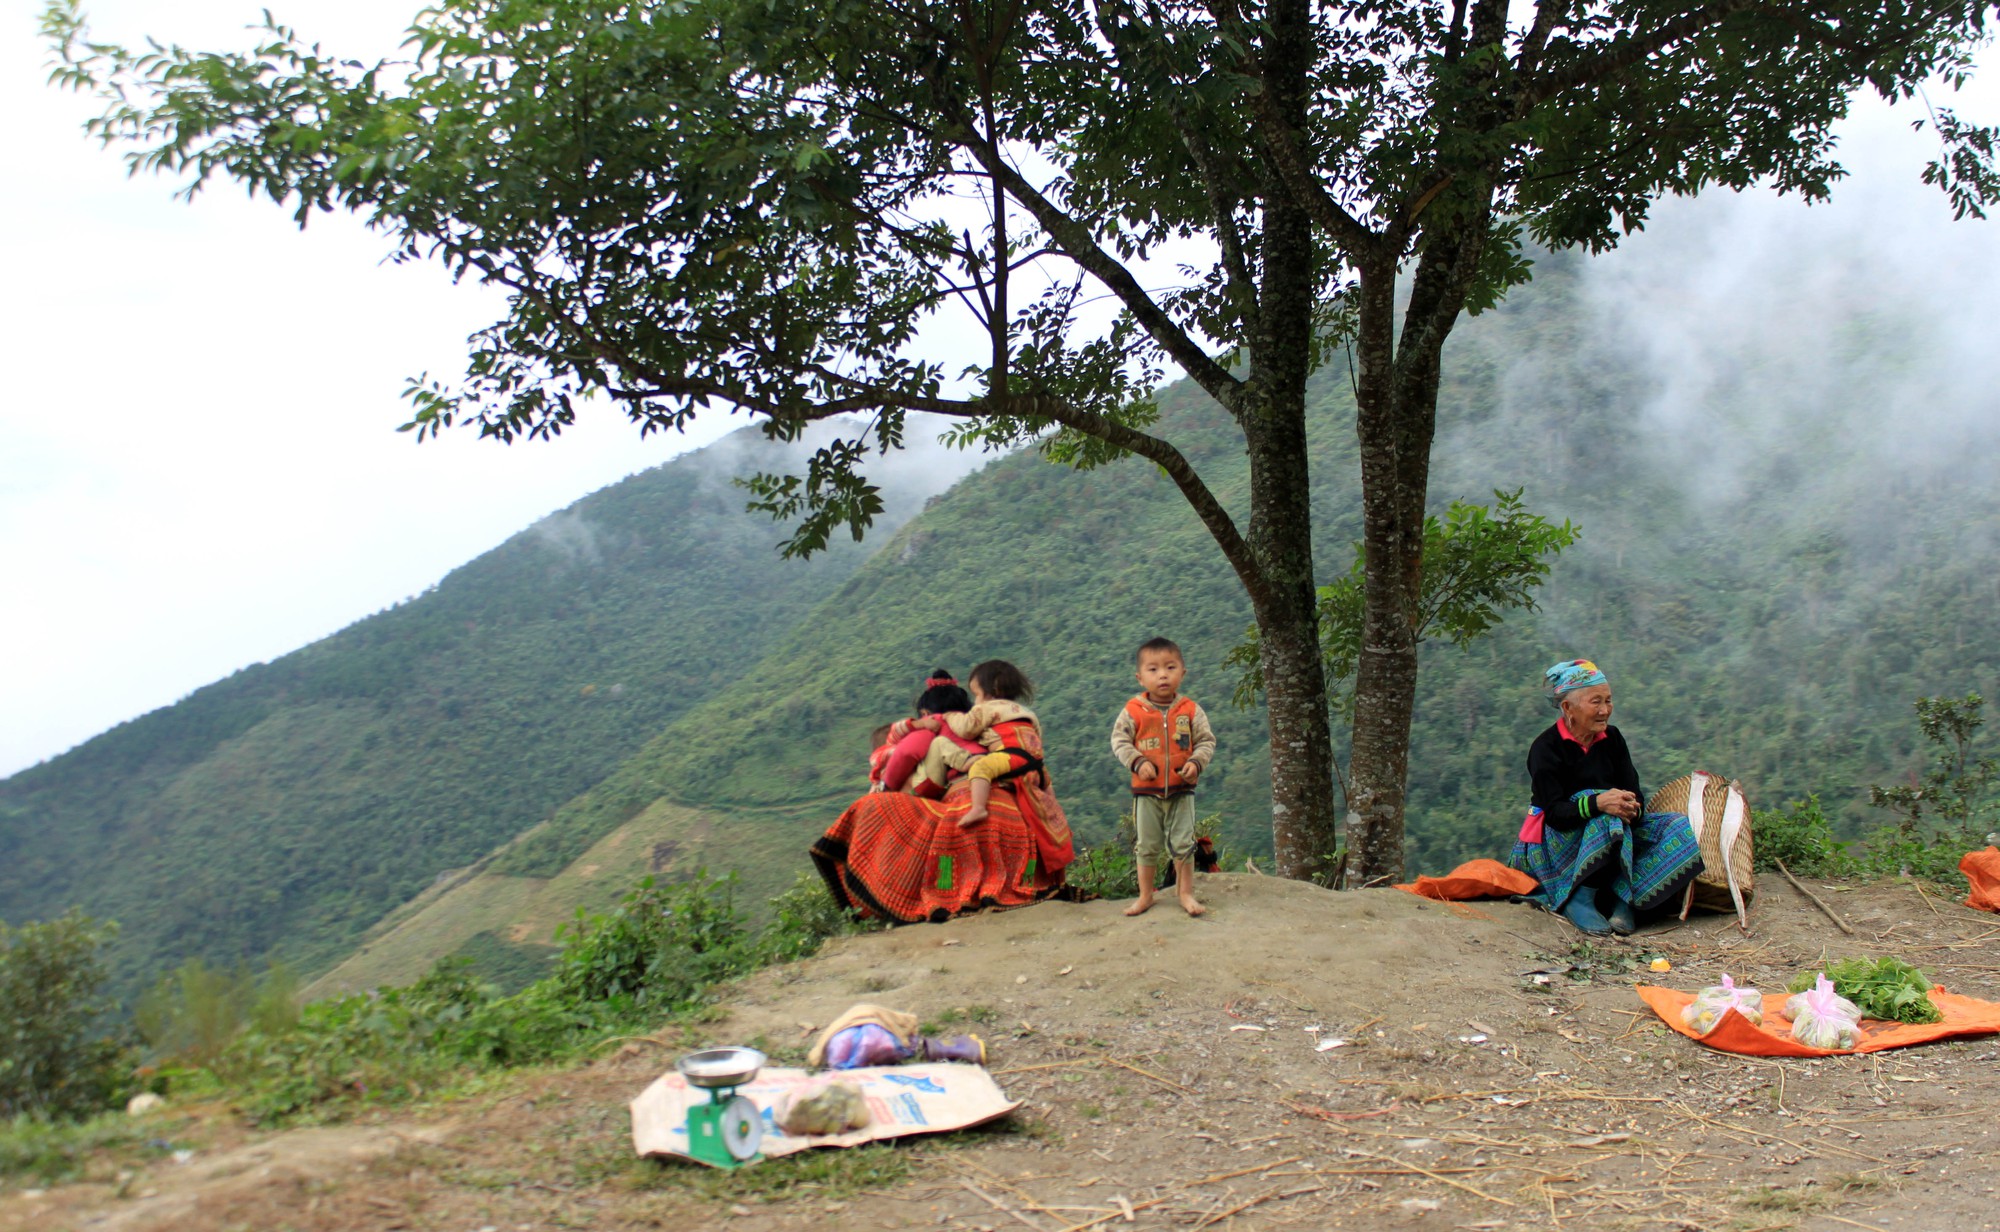 One can find indigenous people selling homegrown vegetables on the way to Ta Xua Village. Photo: Thu Hue